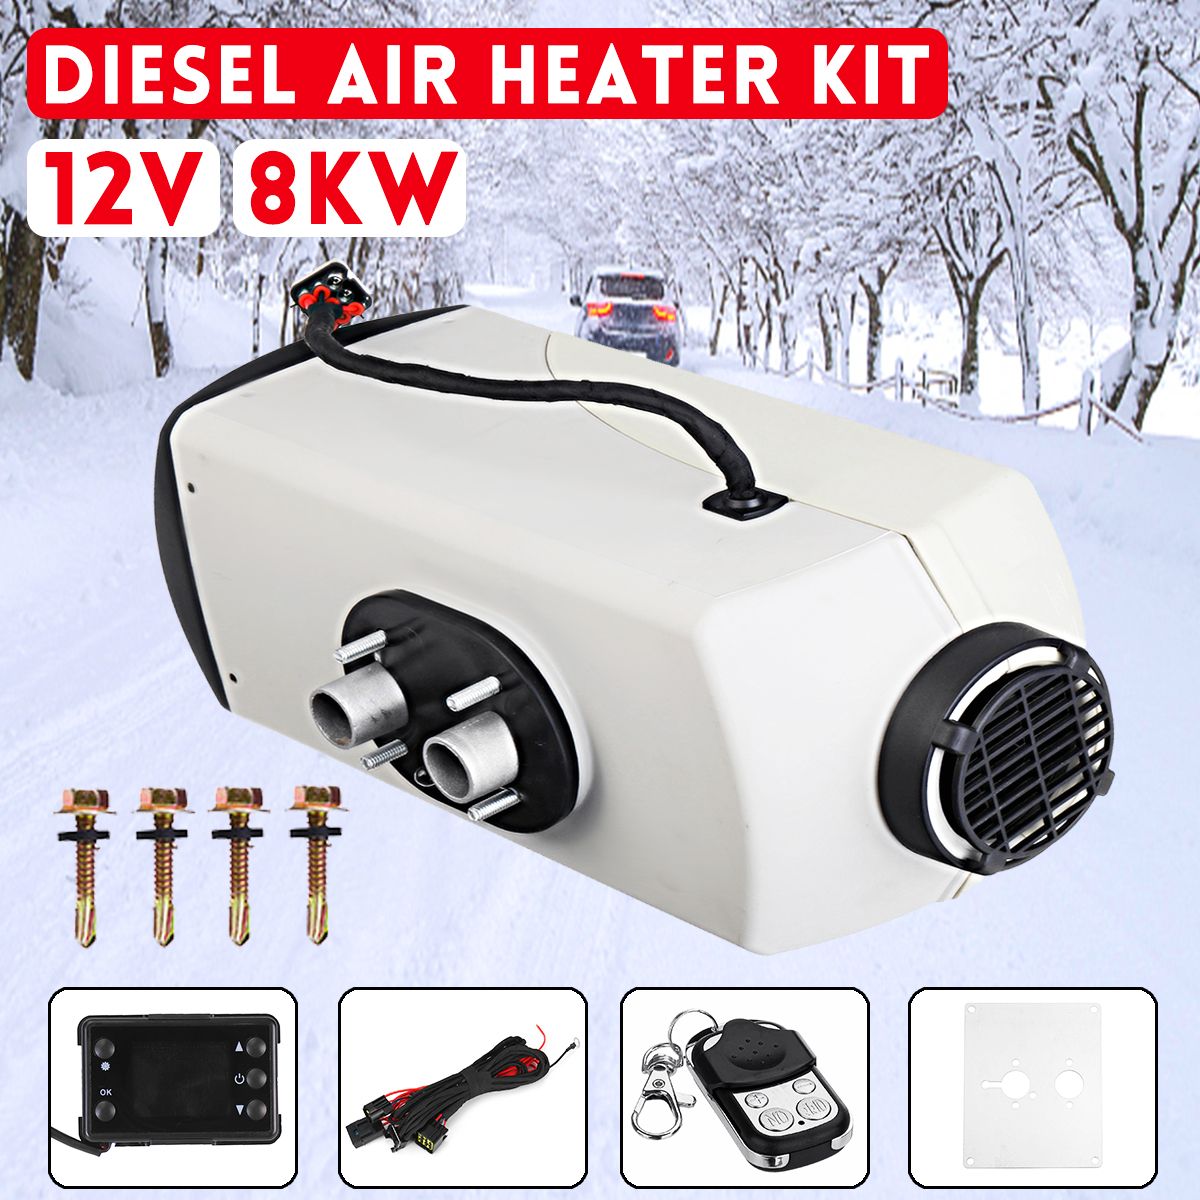 Diesel-Air-Parking-Heater-12V-8KW-With-Remote-Control-LCD-Monitor-For-Car-RV-Trailer-Truck-Boat-1513981